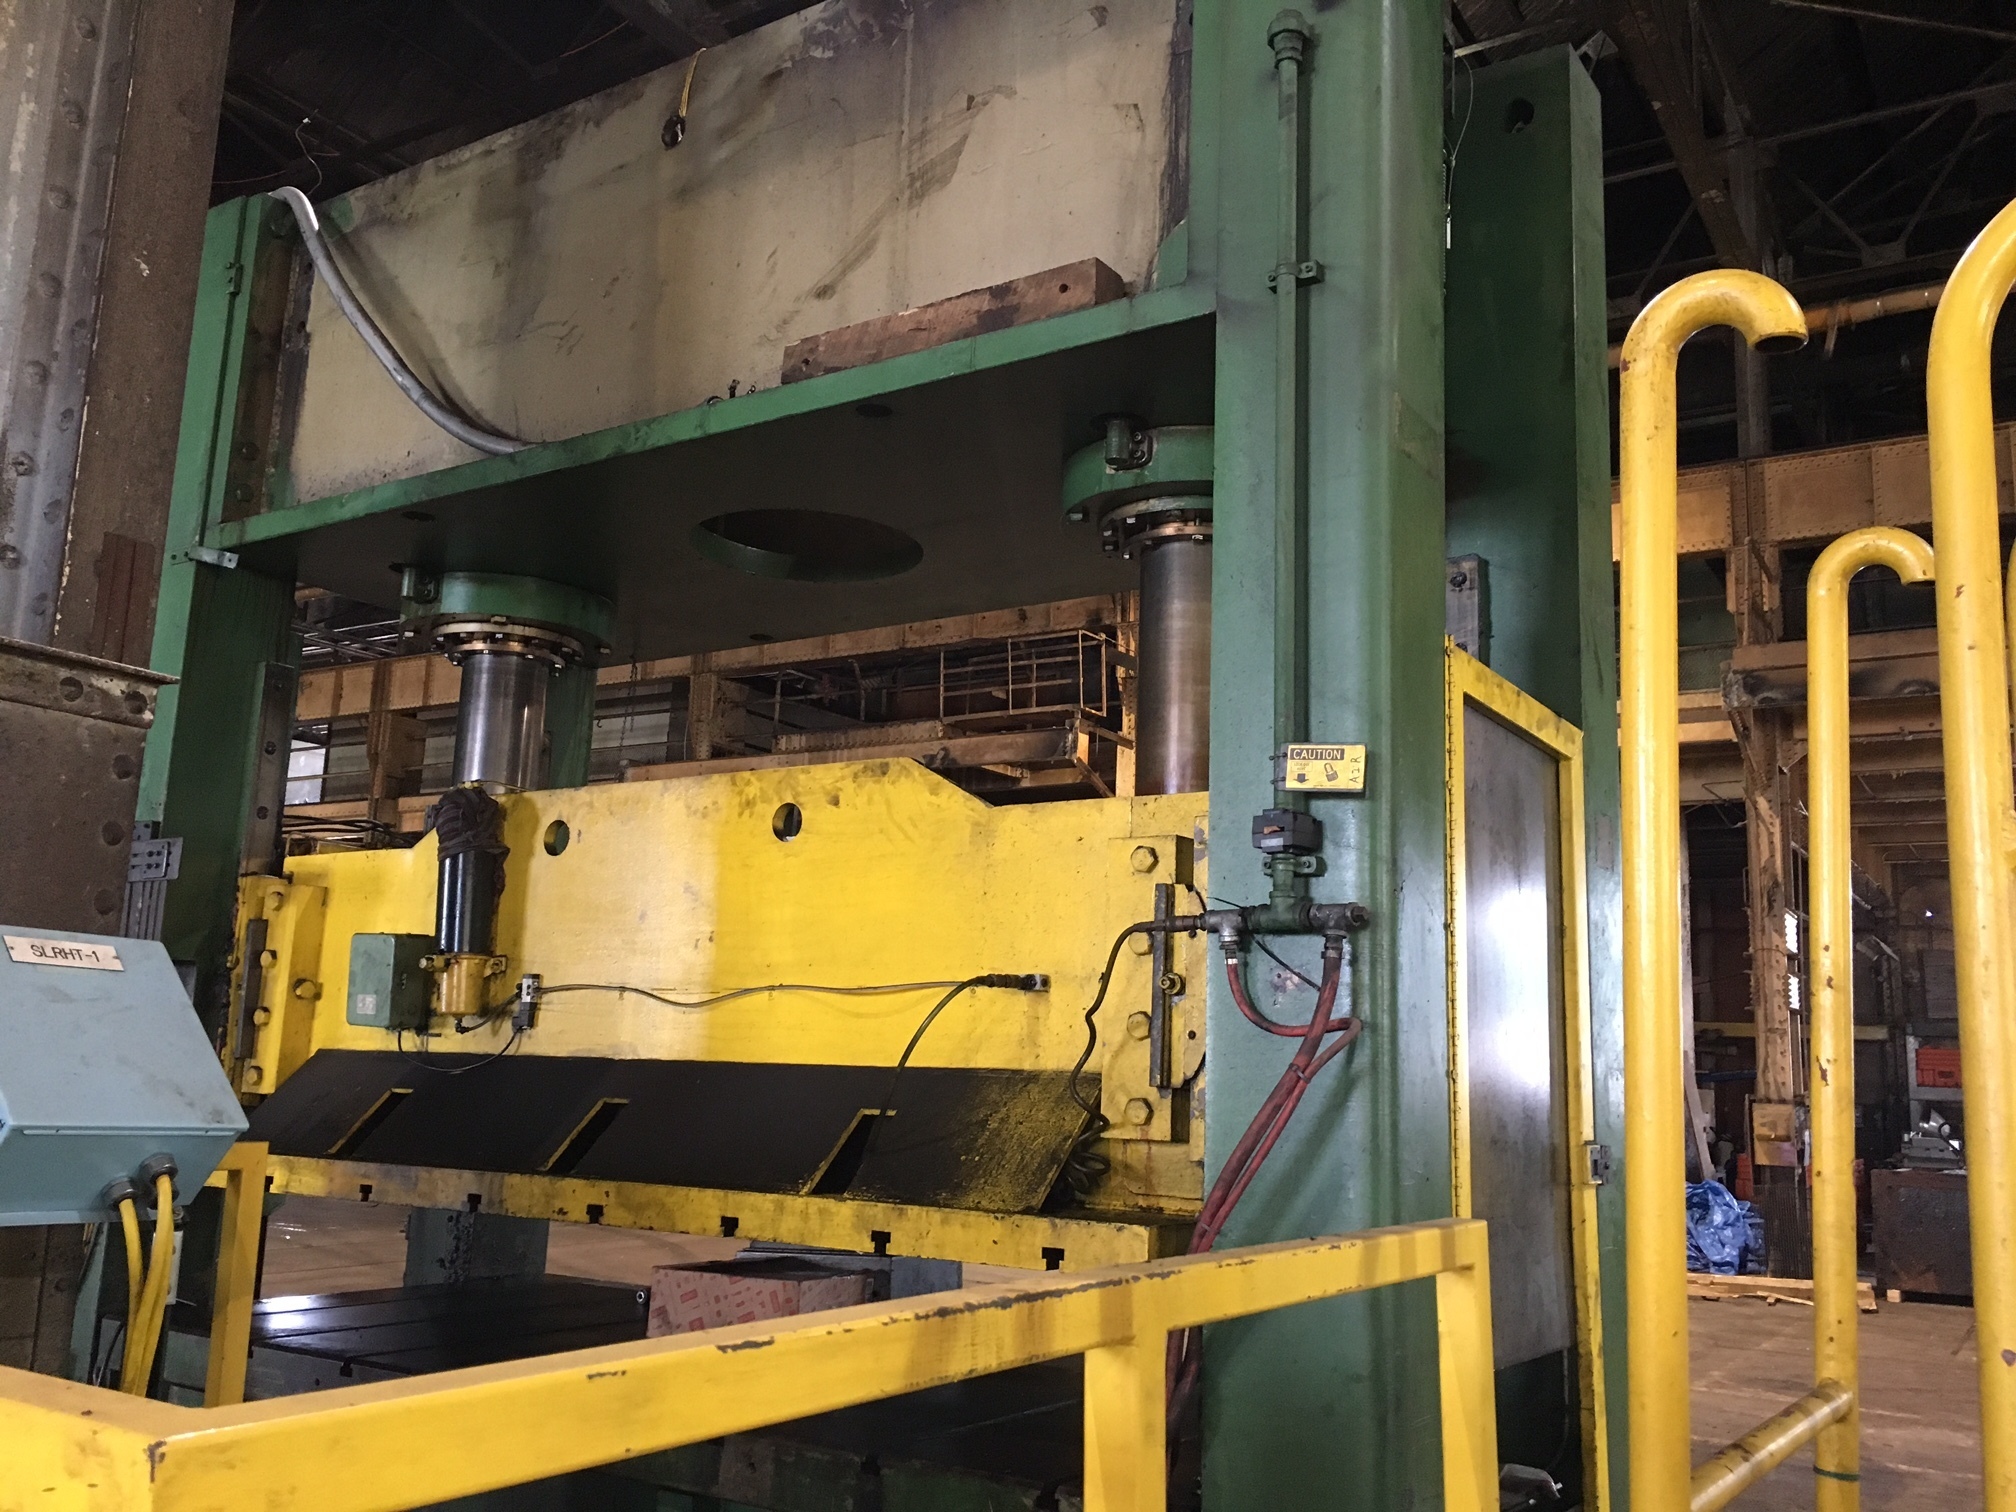 200 Ton Capacity Pacific Straight Side Hydraulic Press For Sale